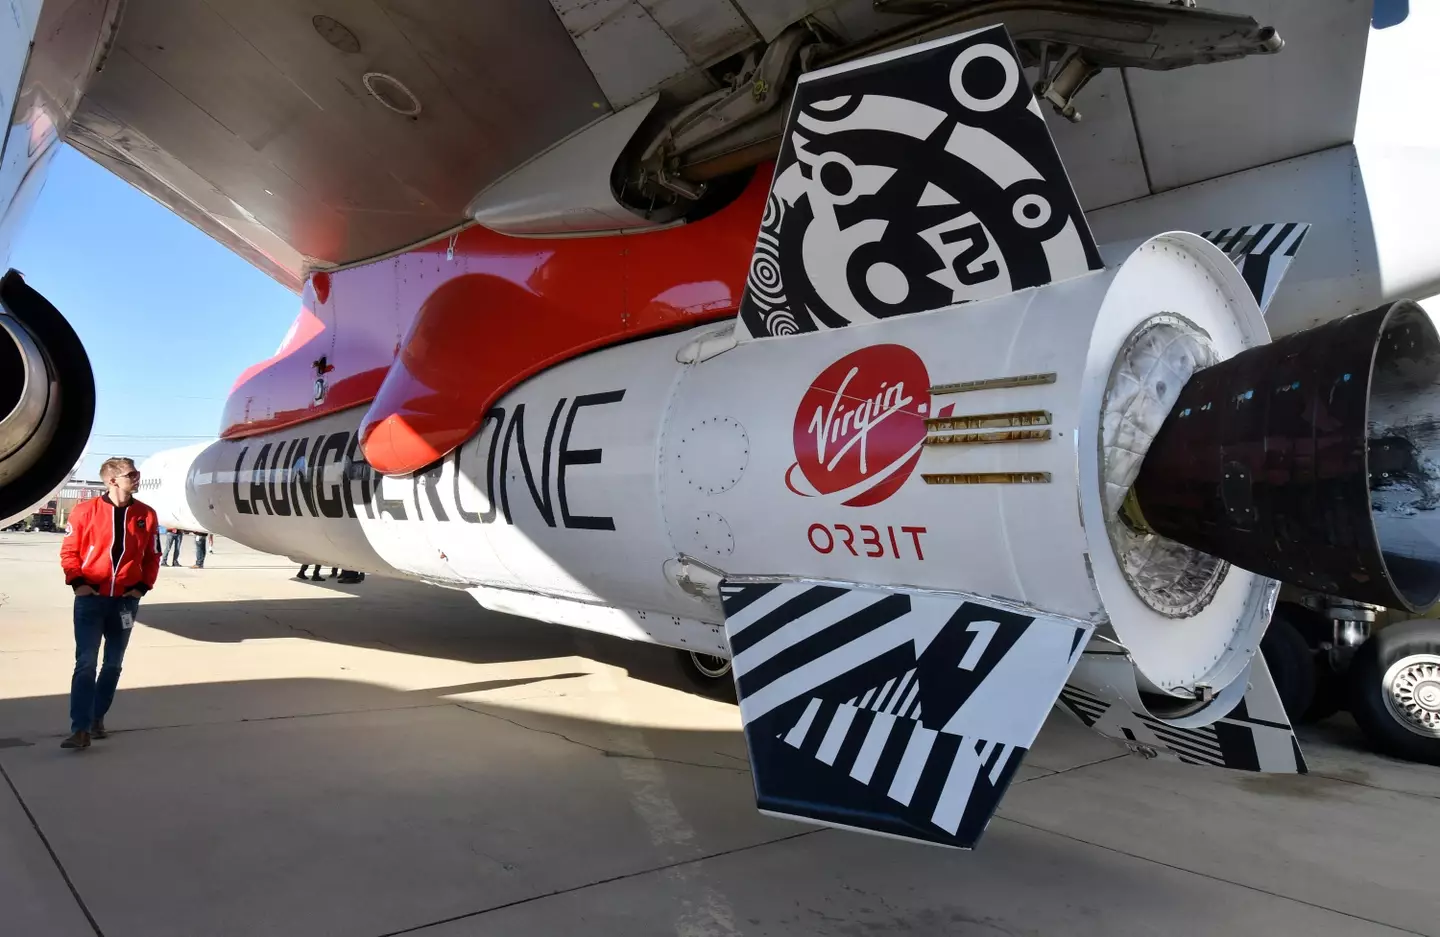 The 747 will release Virgin Orbit's LauncherOne rocket, which will have the mission of launching satellites up into space.